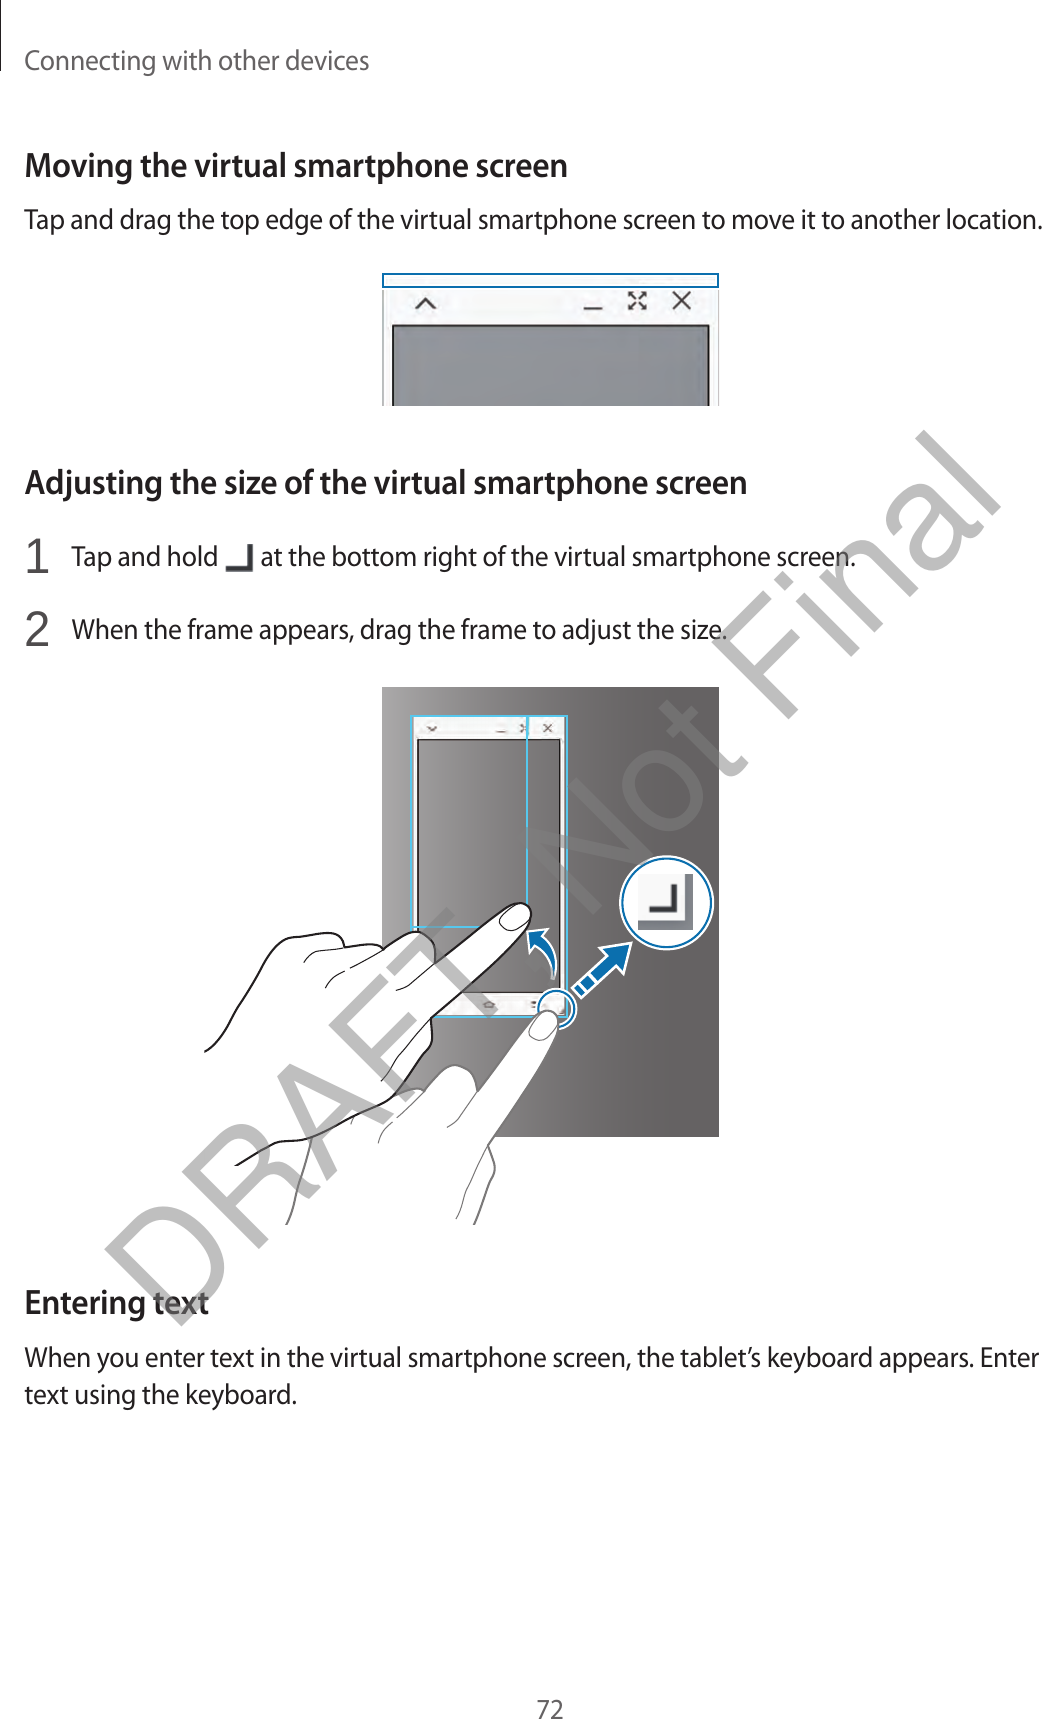 Connecting with other devices72Moving the virtual smartphone screenTap and drag the top edge of the virtual smartphone screen to move it to another location.Adjusting the size of the virtual smartphone screen1  Tap and hold   at the bottom right of the virtual smartphone screen.2  When the frame appears, drag the frame to adjust the size.Entering textWhen you enter text in the virtual smartphone screen, the tablet’s keyboard appears. Enter text using the keyboard.DRAFT, Not Final